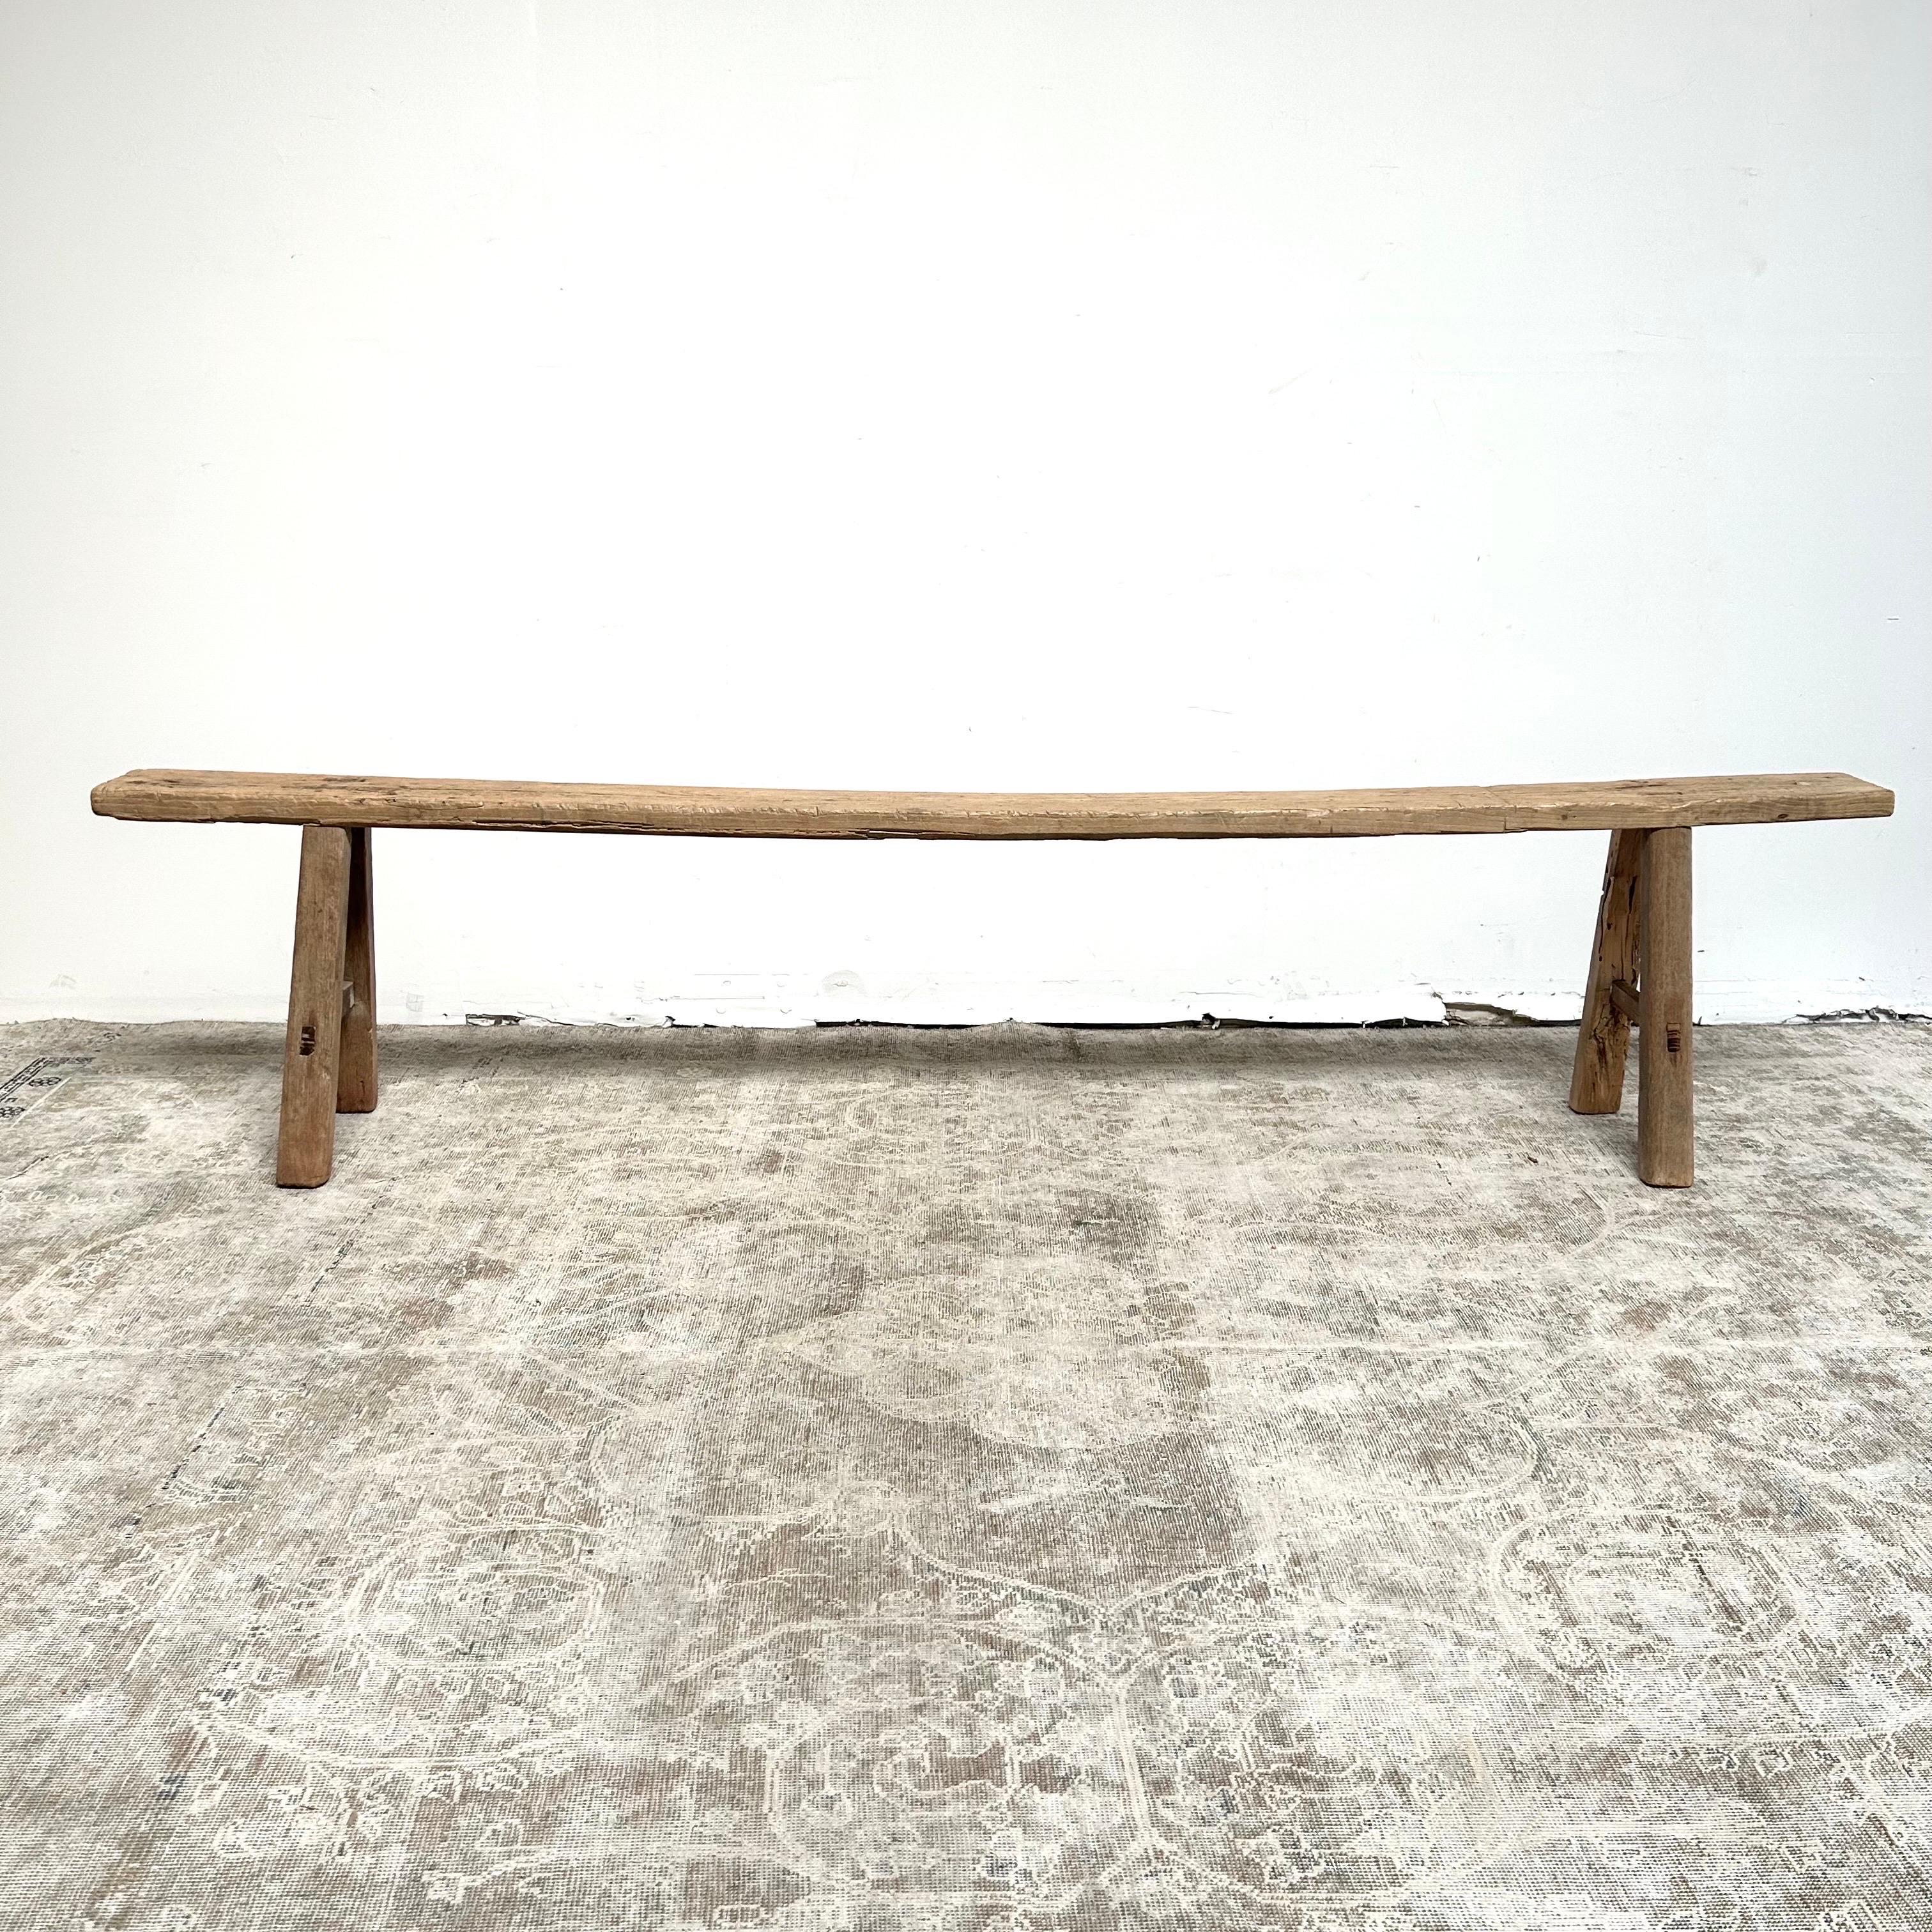 Beautiful one of a kind Elm bench 
A weathered aged patina that only happens over time.
Size: 103”w x 15”d x 22”h 
Seat top Depth:7”
Sturdy, ready for use, and great as an entry bench, long hall, or gallery.